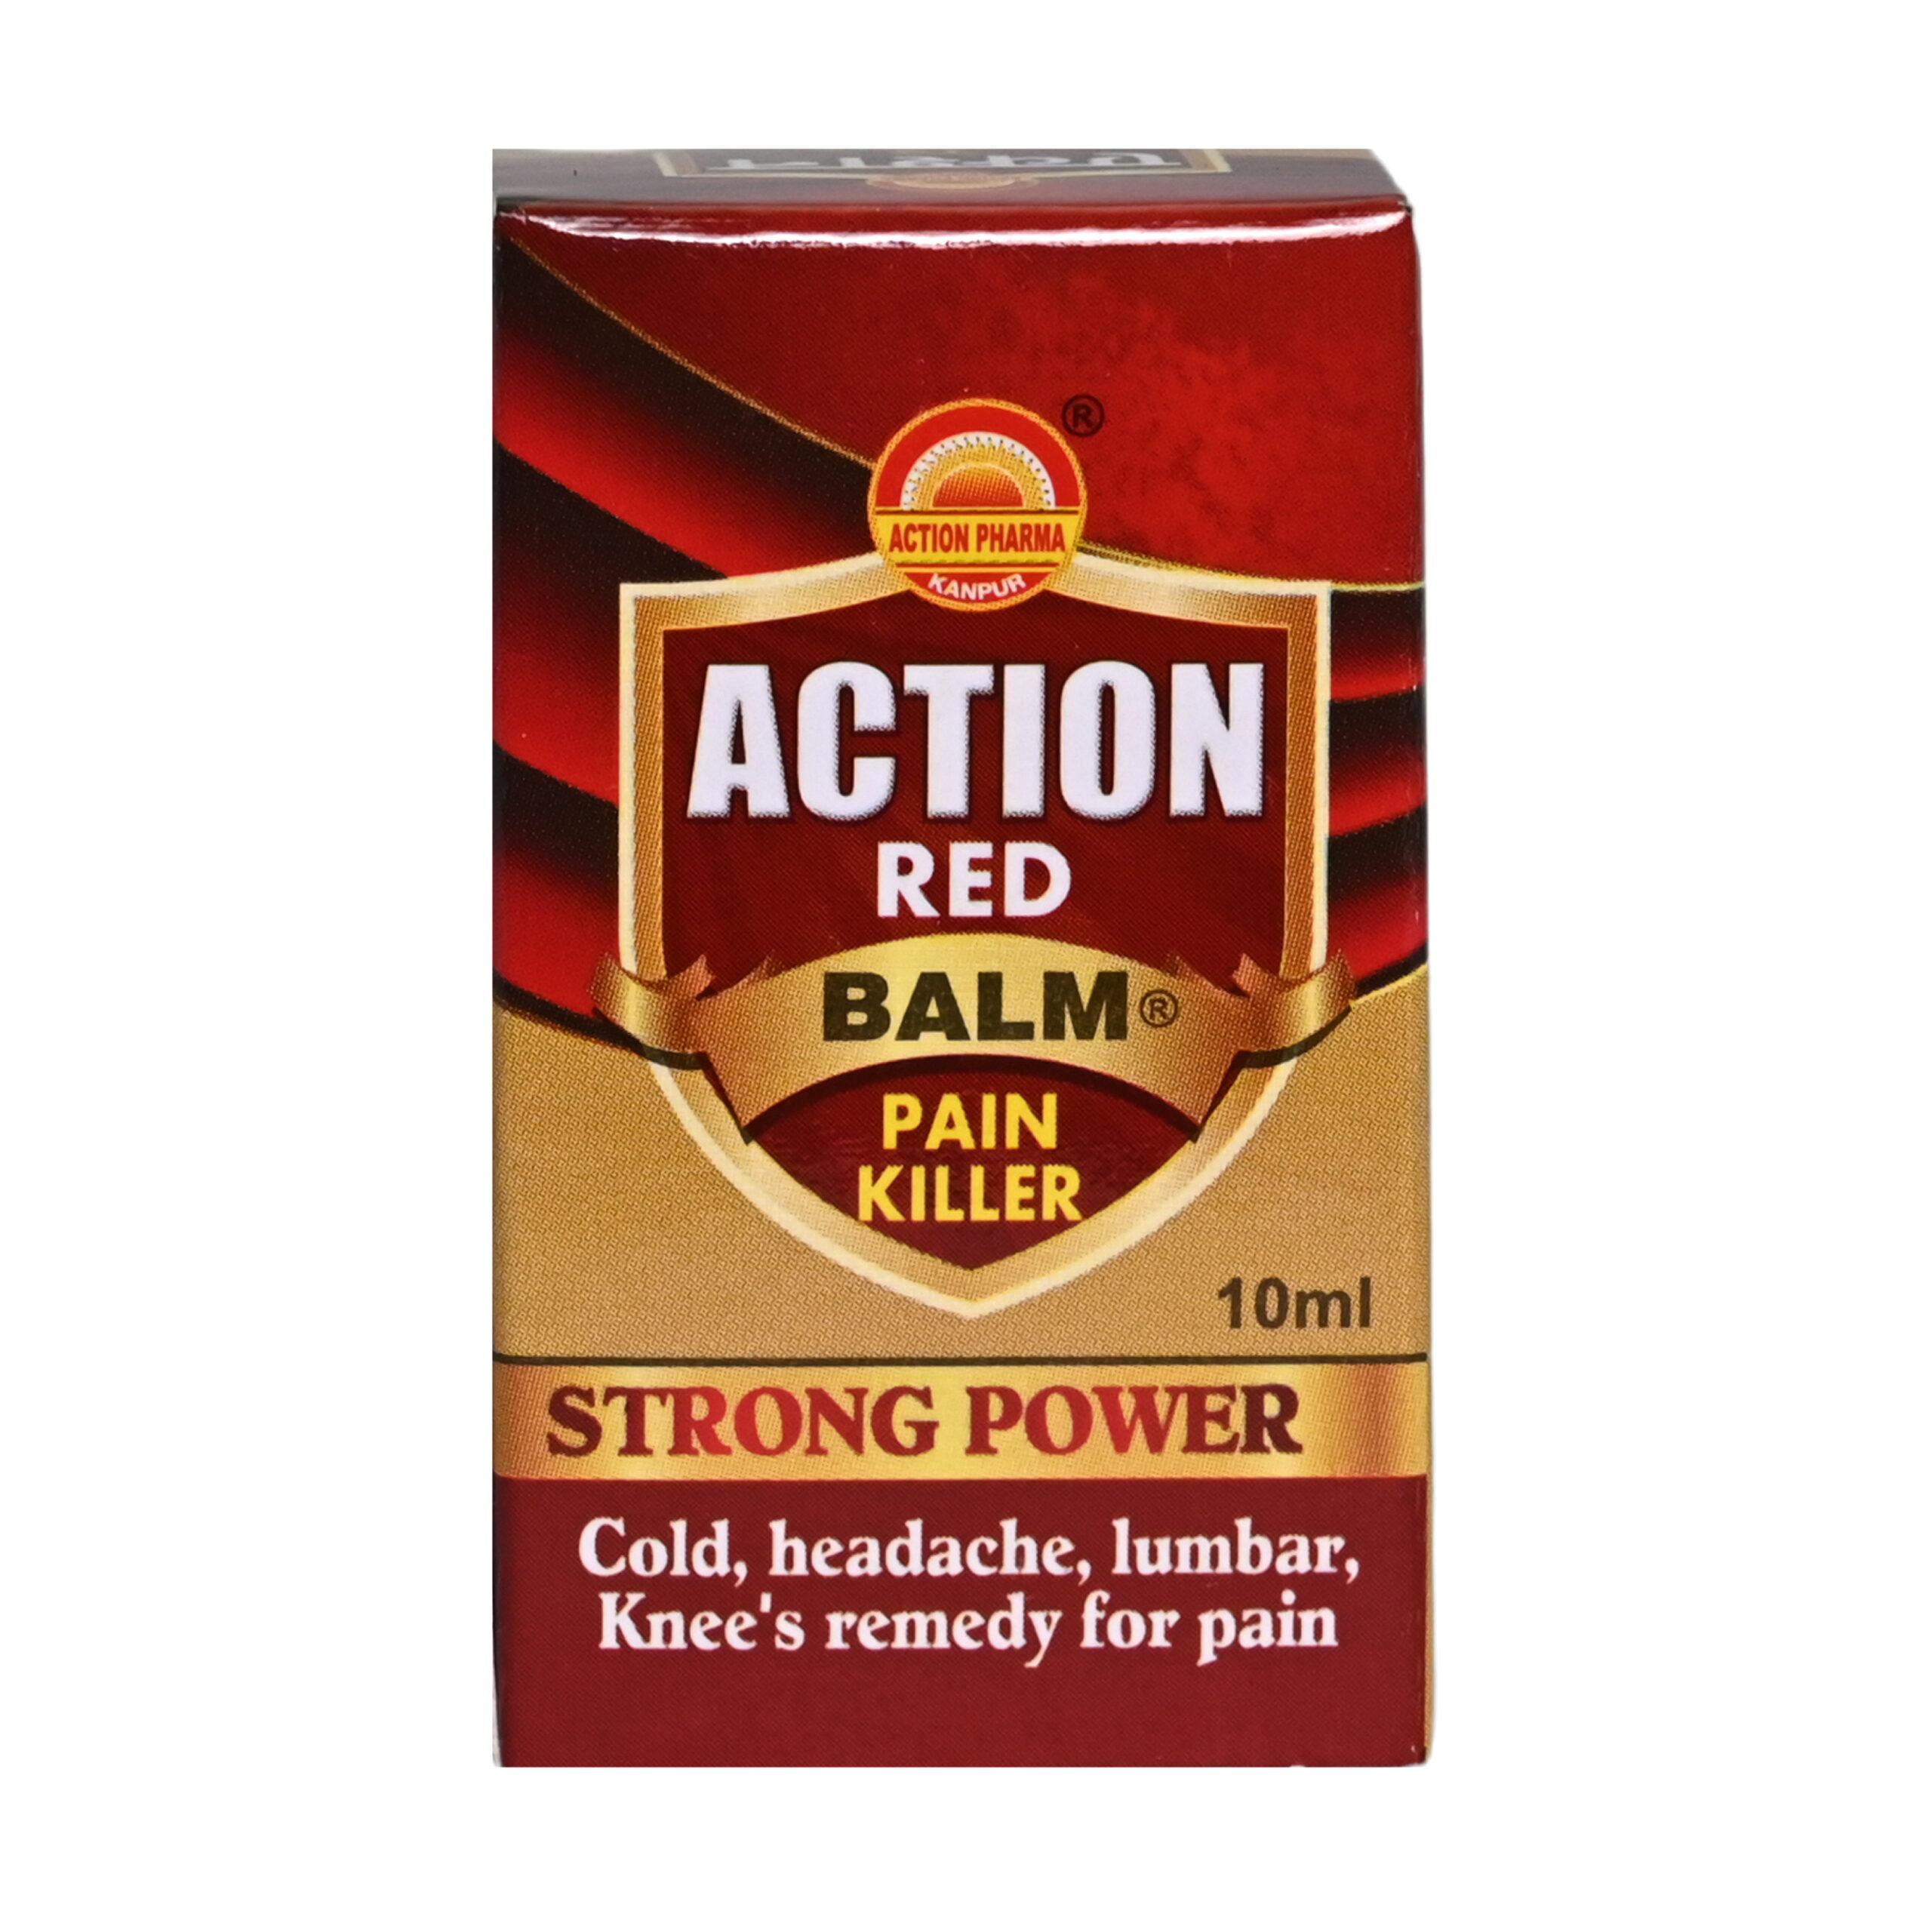 Action Red Balm, Herbal Pain Relief Balm, Ayurvedic Muscle Rub, Natural Joint Pain Relief, Topical Pain Reliever, Muscle Relaxant Balm, Joint Pain Soothing Balm, Ayurvedic Pain Balm, Herbal Analgesic Rub, Pain Management Balm